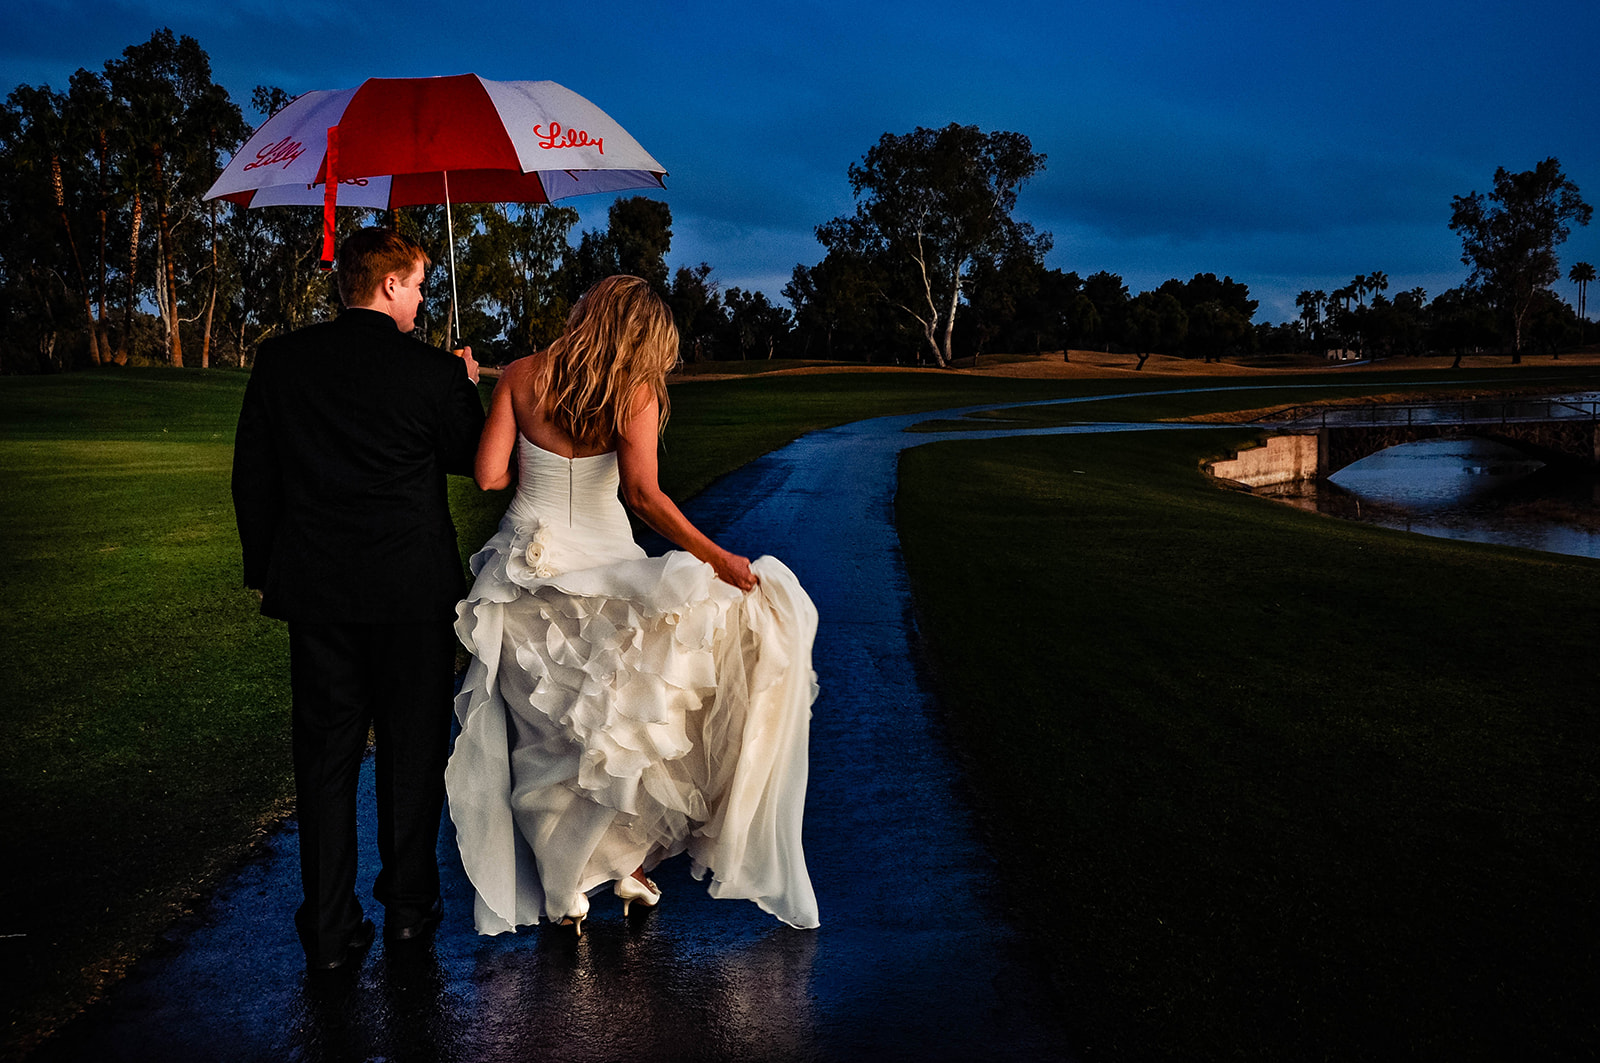 Bride and Groom walking on a wet golf cart path through a golf course next to a lake at the McCormick Ranch Golf Club on a dark, gloomy rainy day in Scottsdale, Arizona. The clouds are dark blue and grey. The bride is holding up her white wedding dress and she walks next to the groom who is in his black tuxedo carrying a red and white pattern umbrella over his and her head.